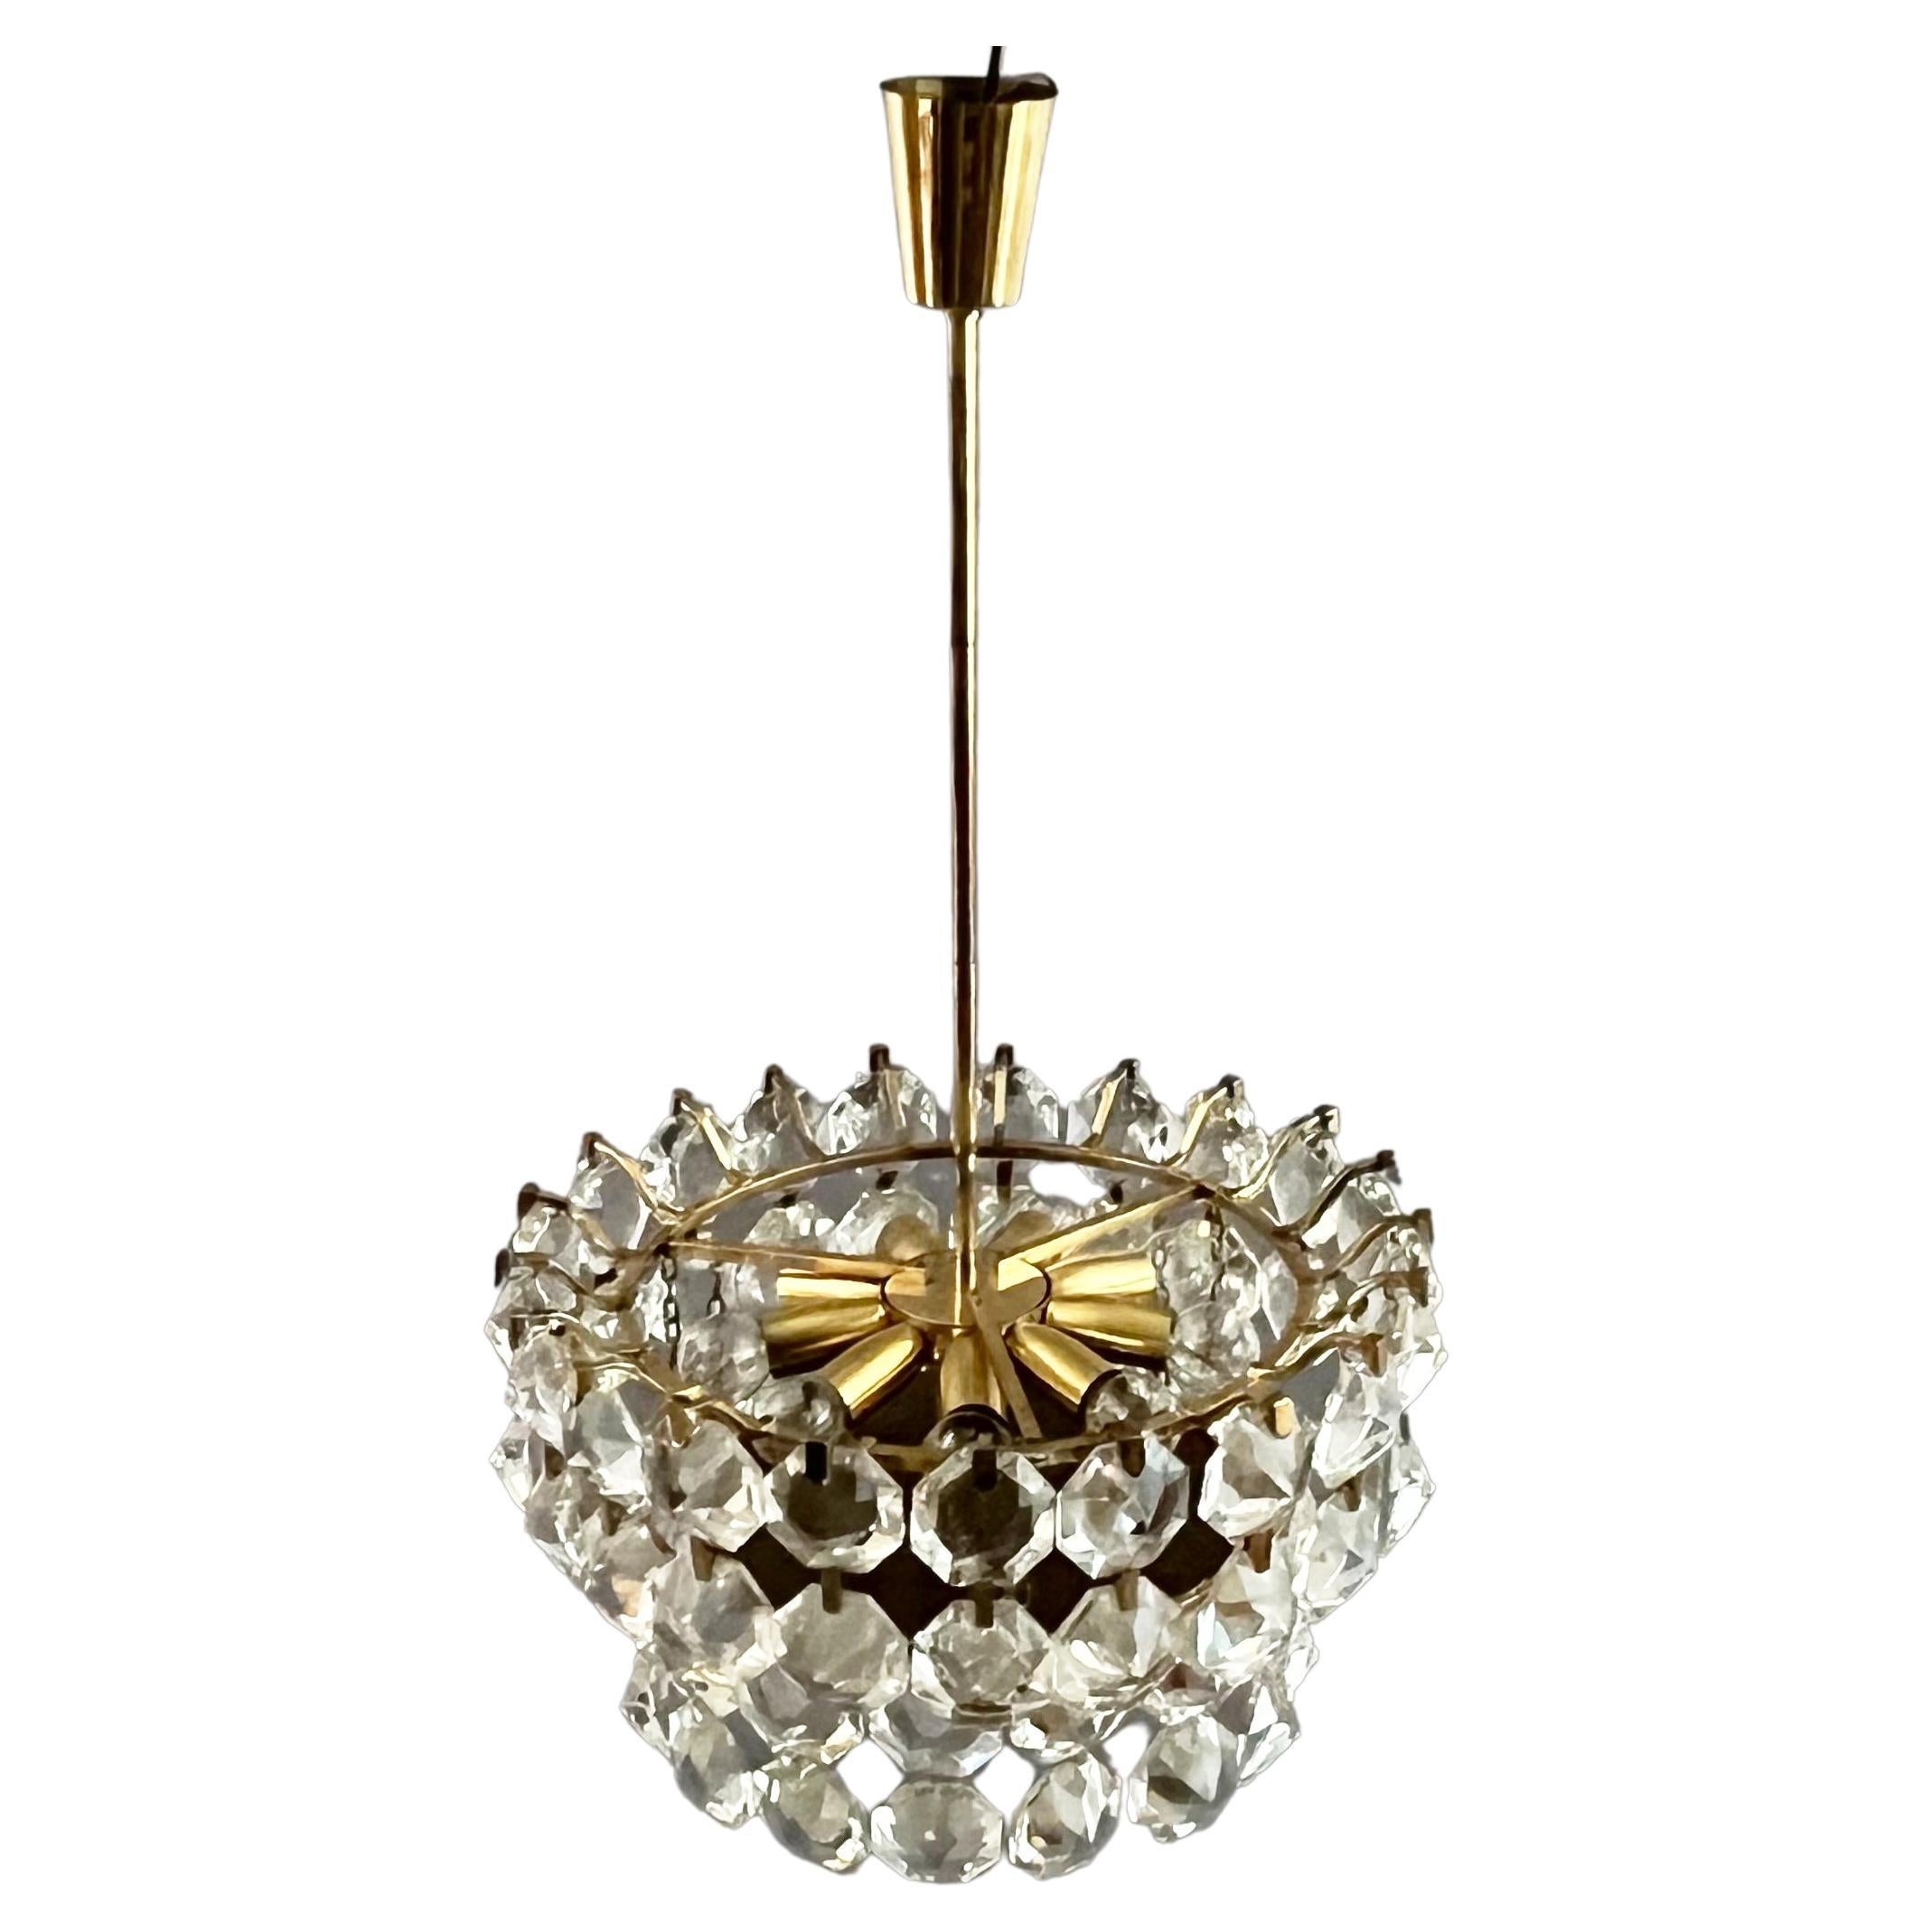 Bakalowits & sons, Vienna 1960, hanging lamp, decorated with hand cut crystals